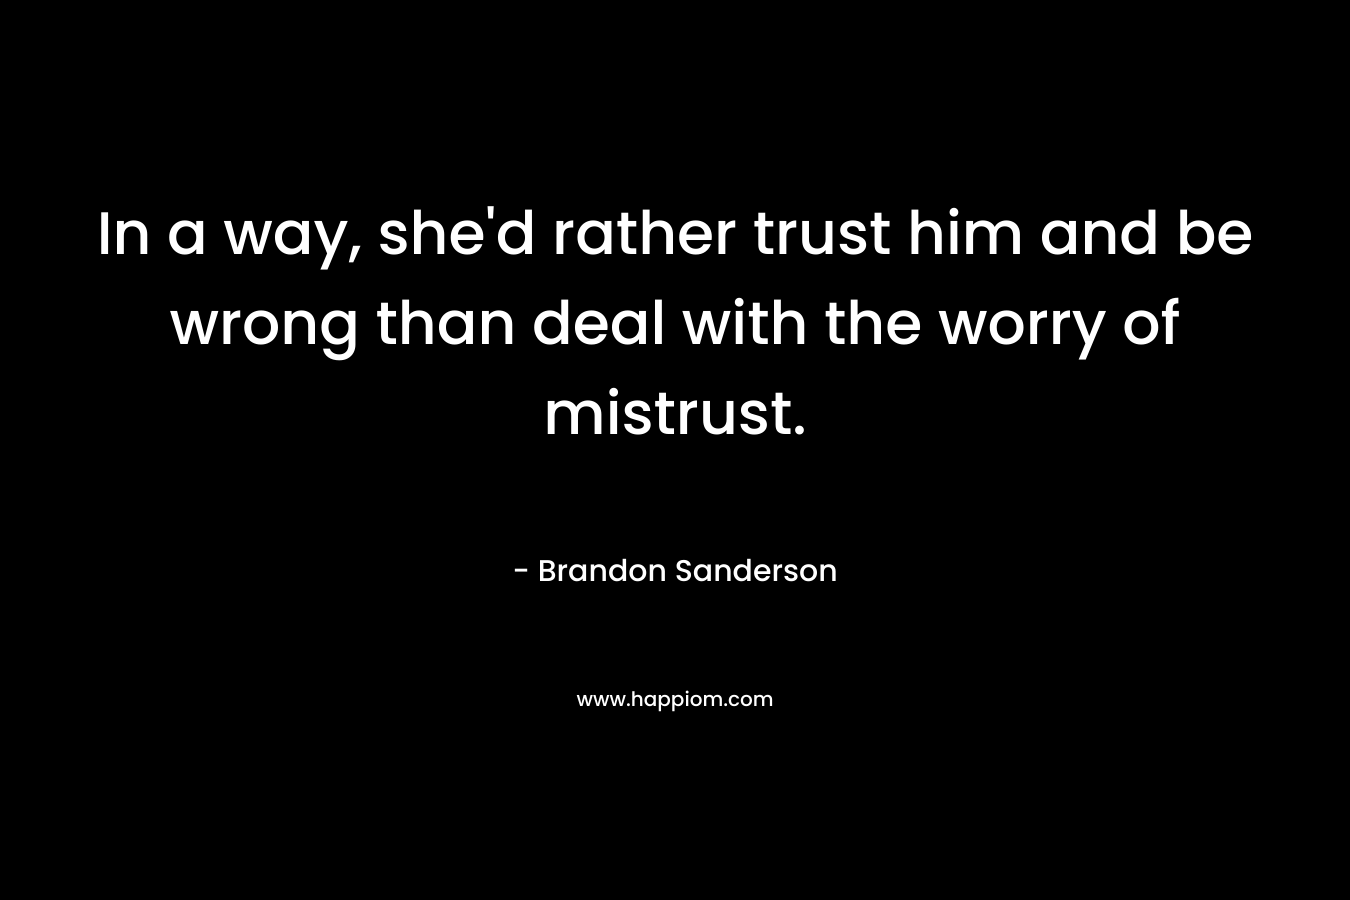 In a way, she’d rather trust him and be wrong than deal with the worry of mistrust. – Brandon Sanderson